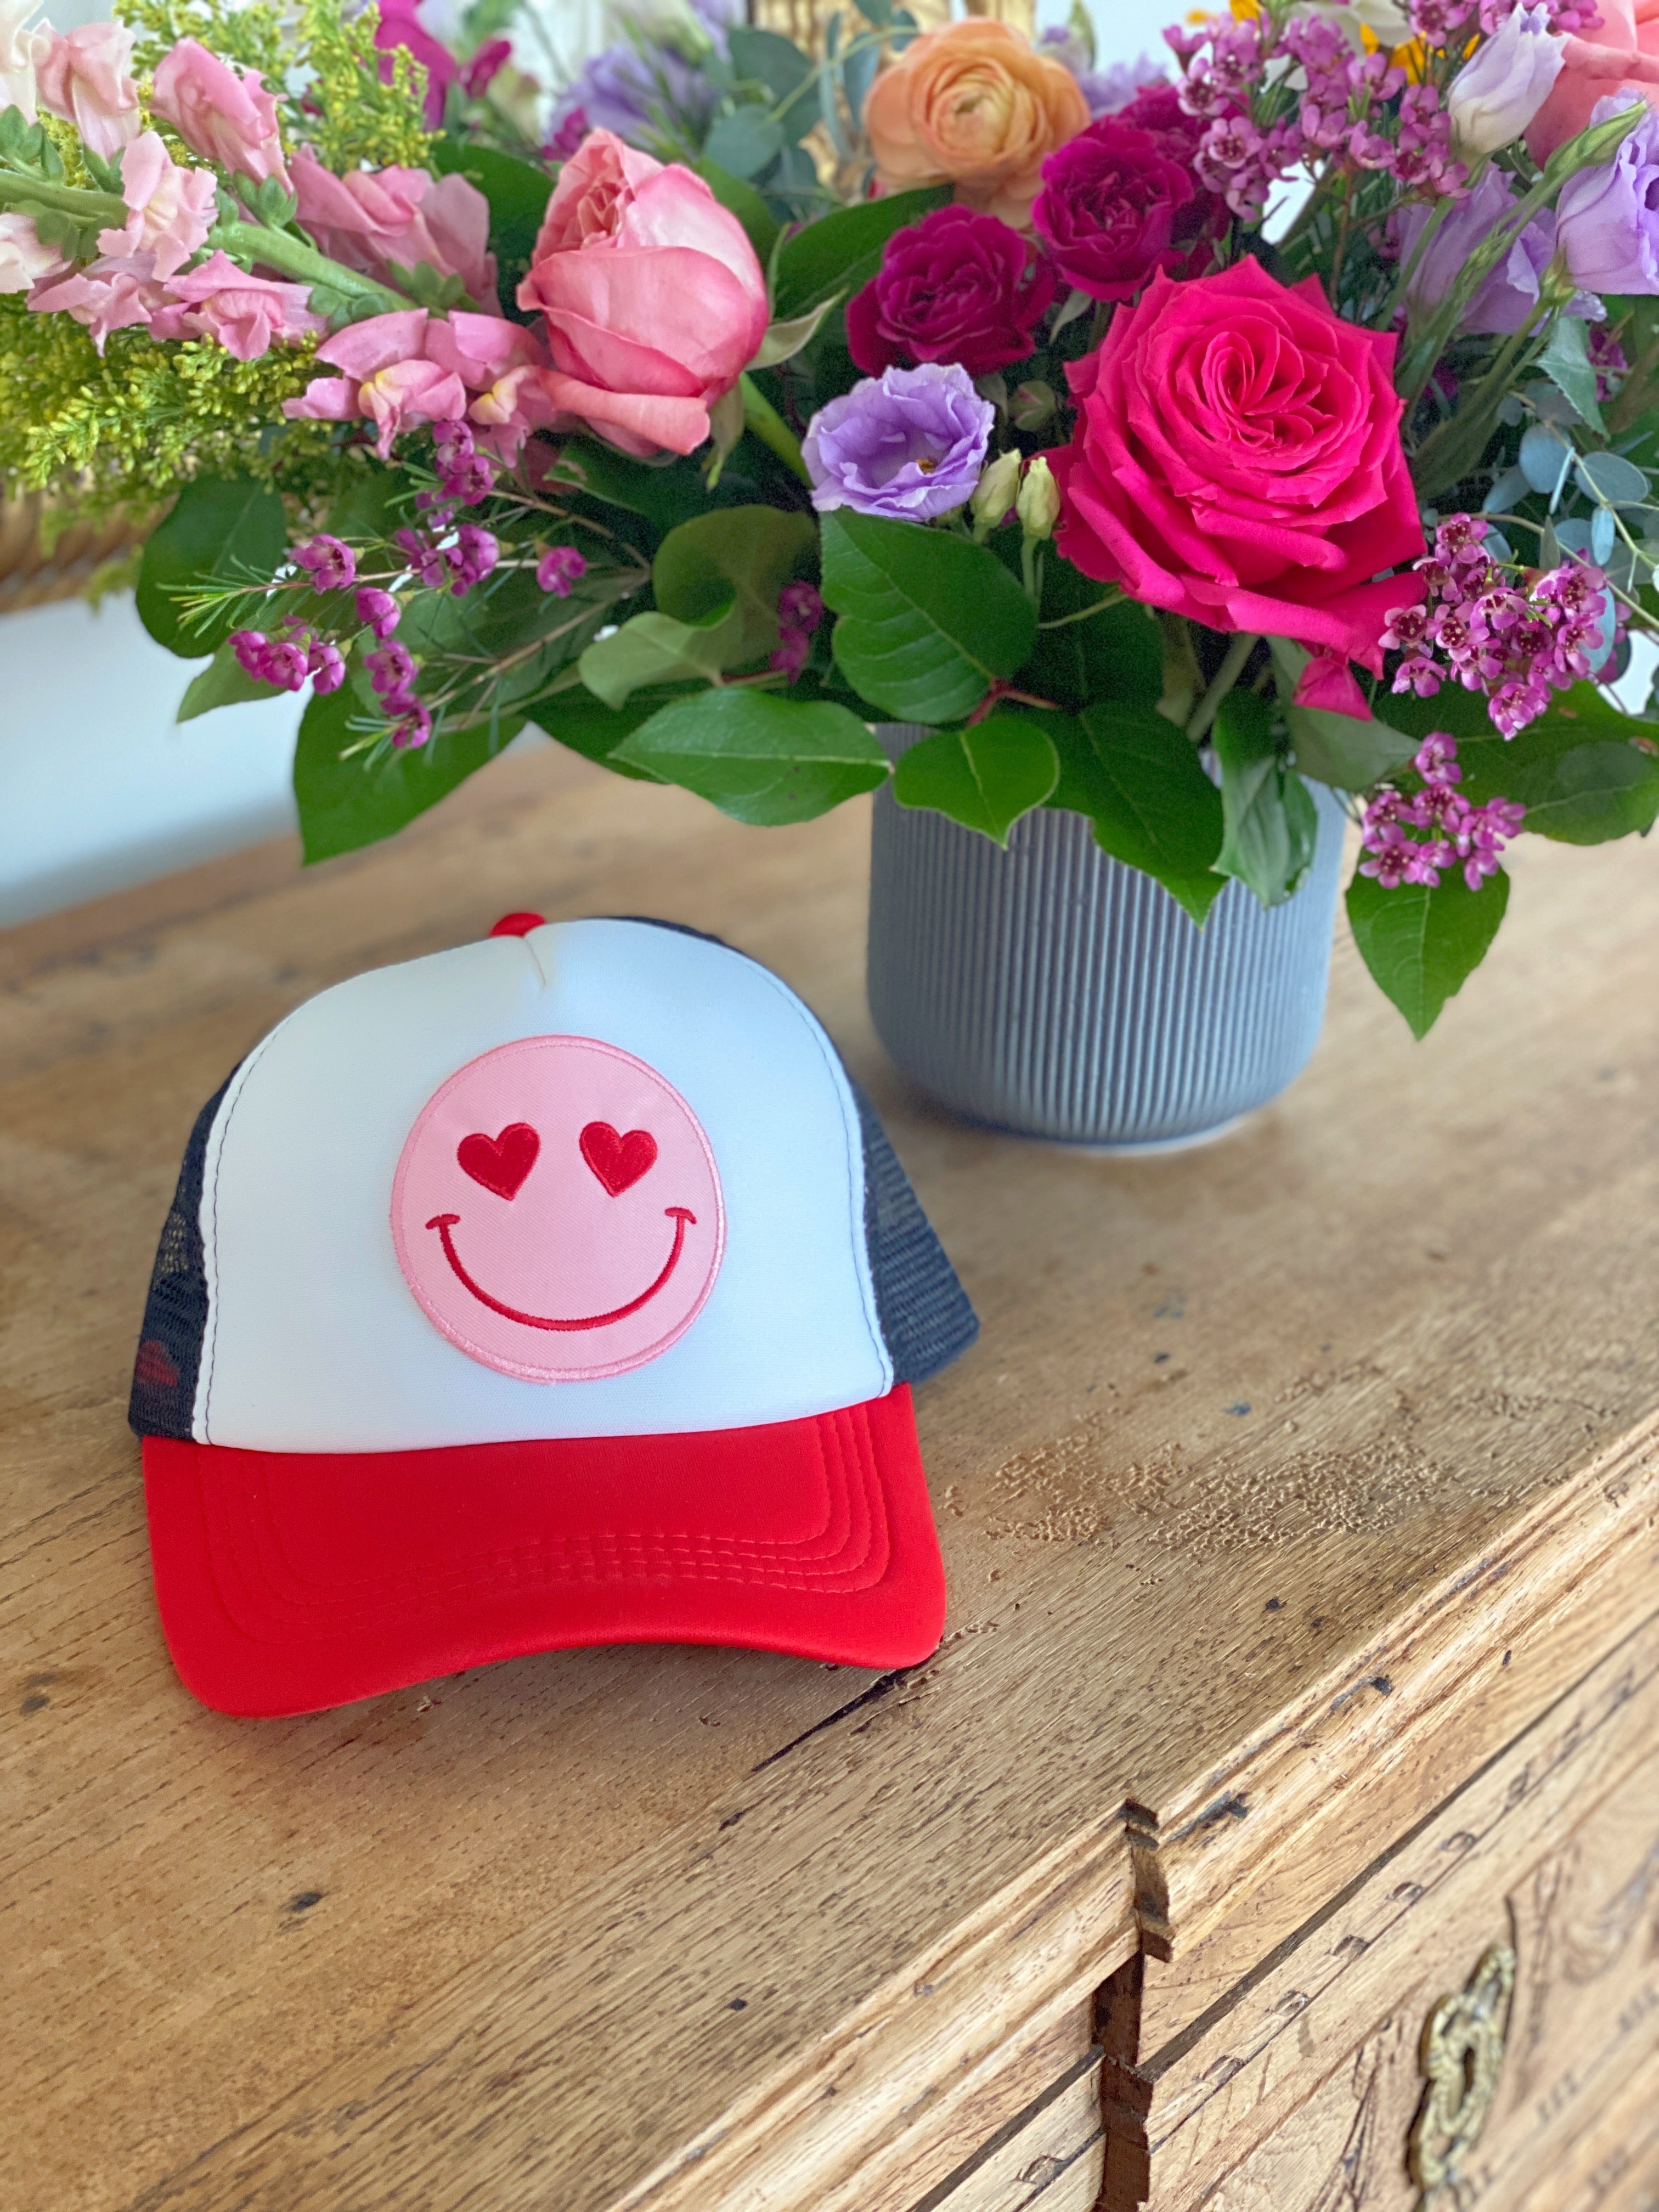 Happy Heart Trucker Hat by Confettees - Red White & Black